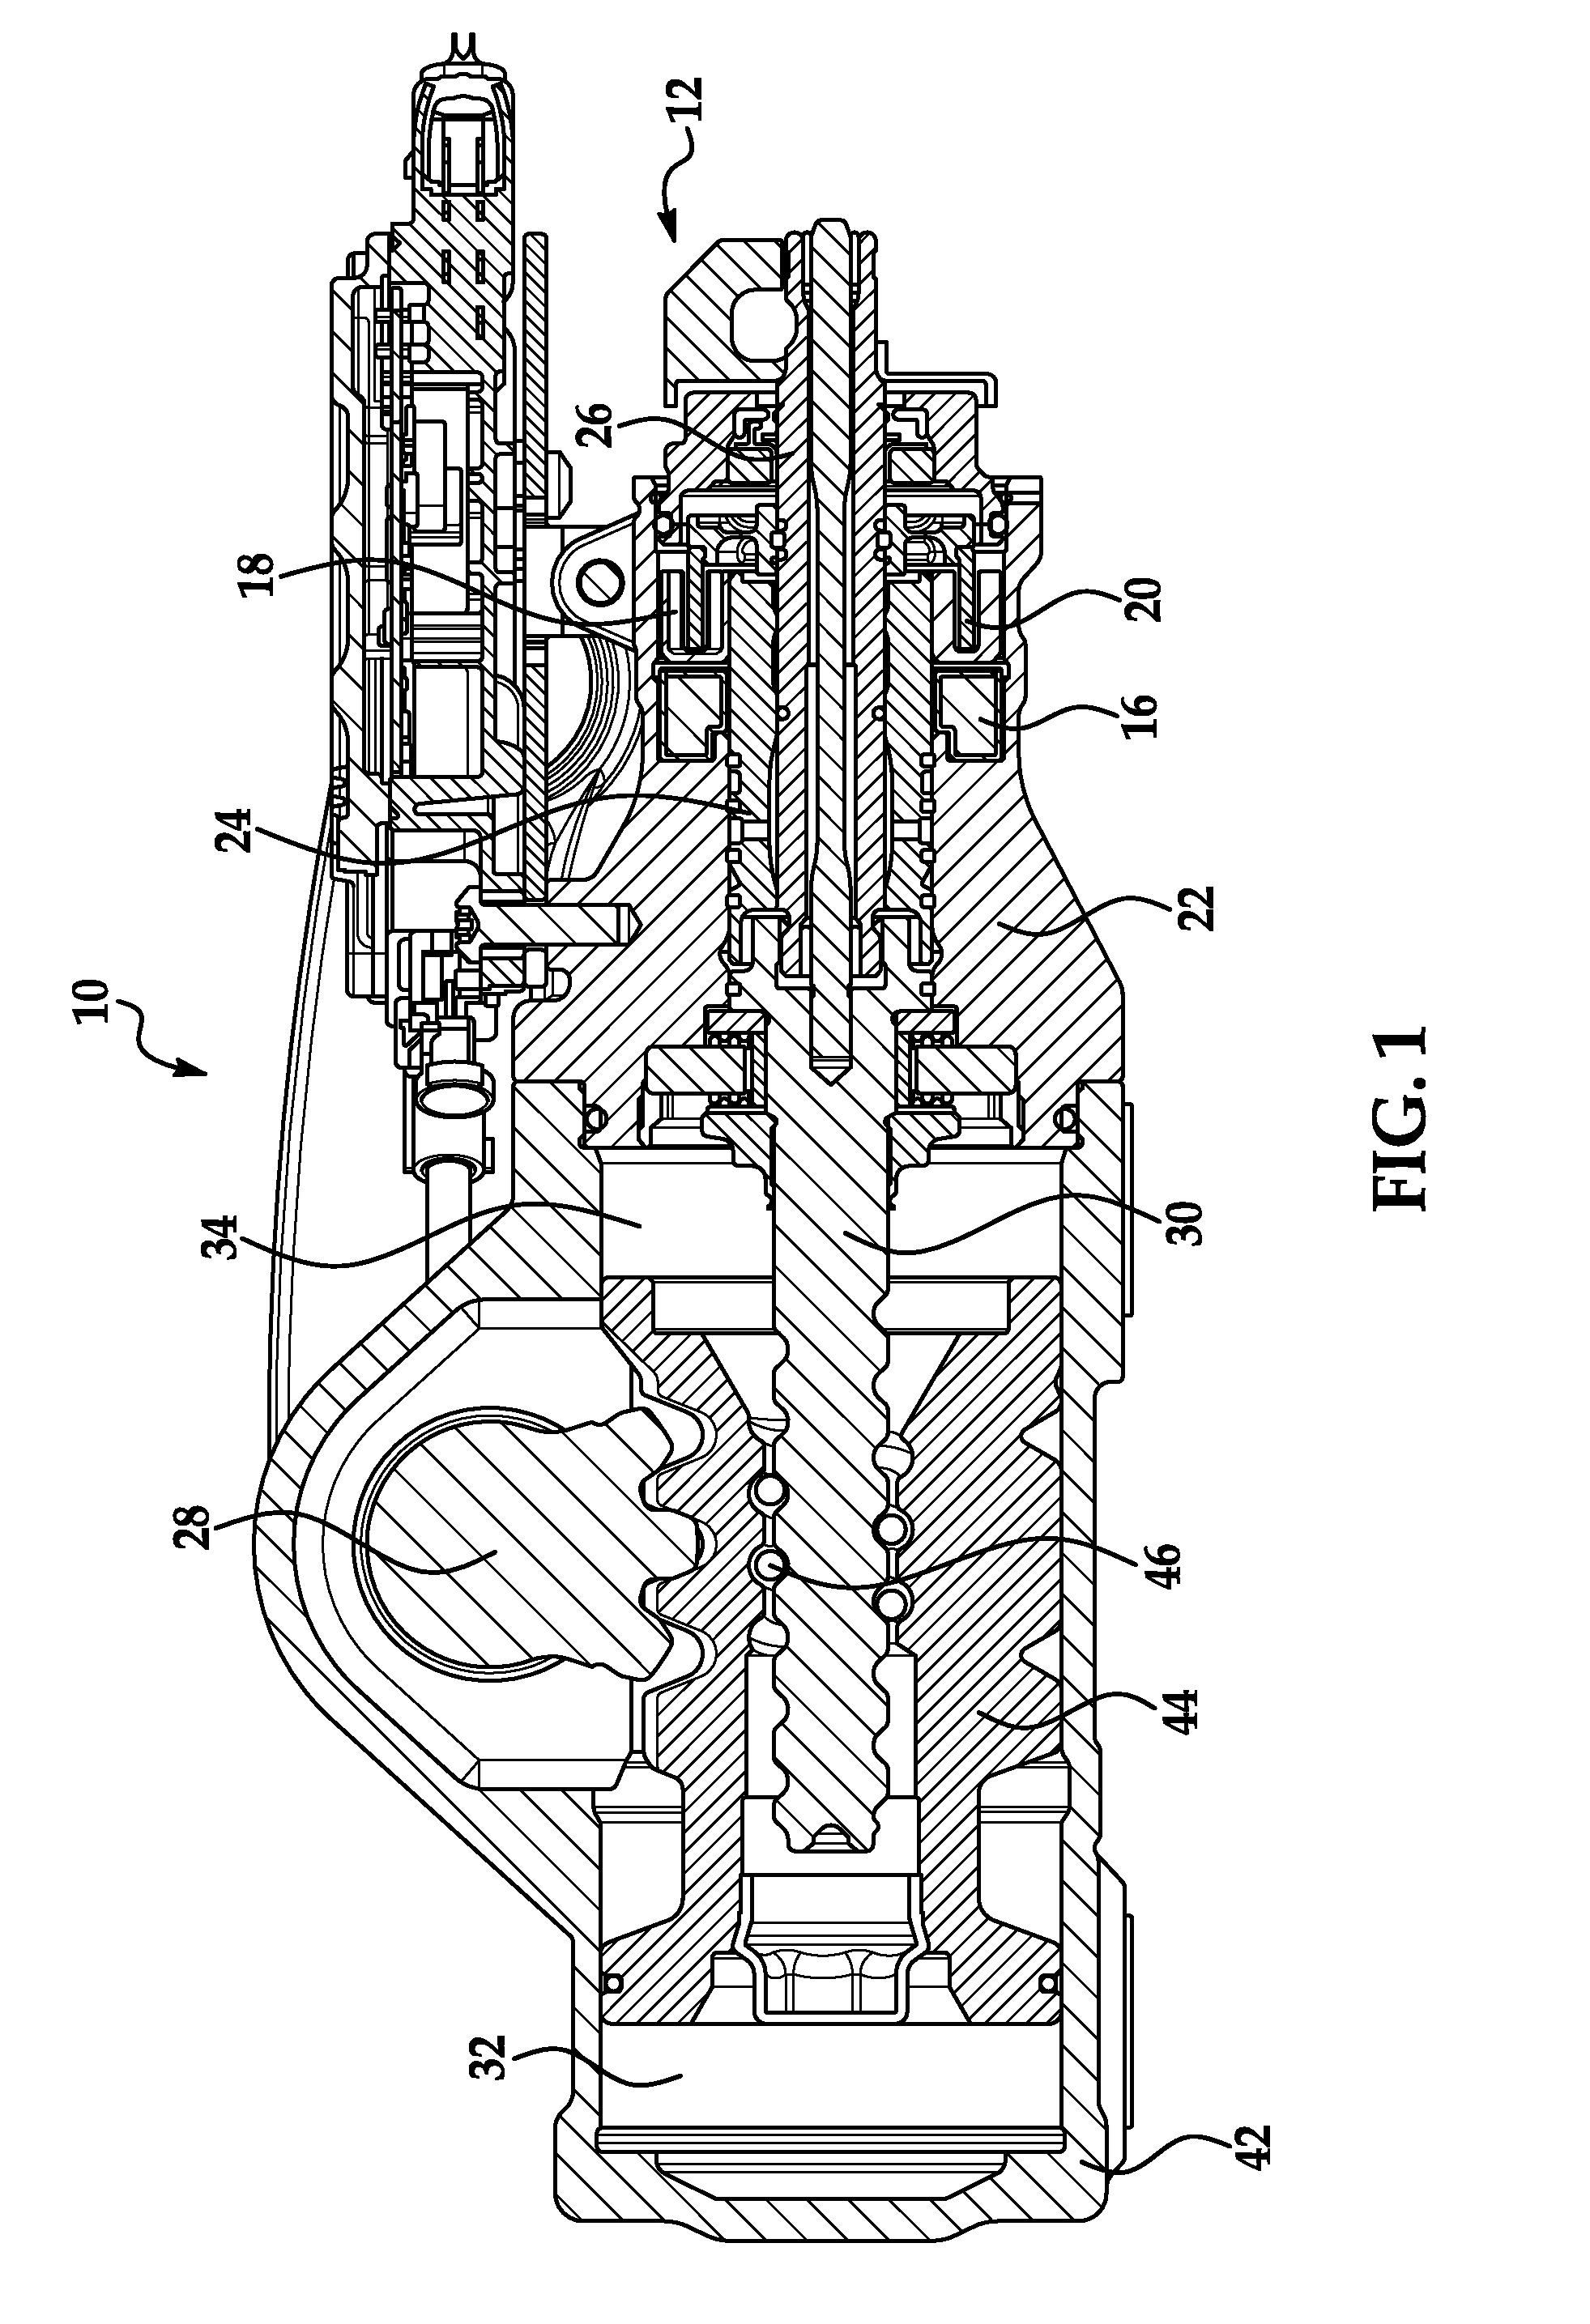 Steering system with magnetic torque overlay